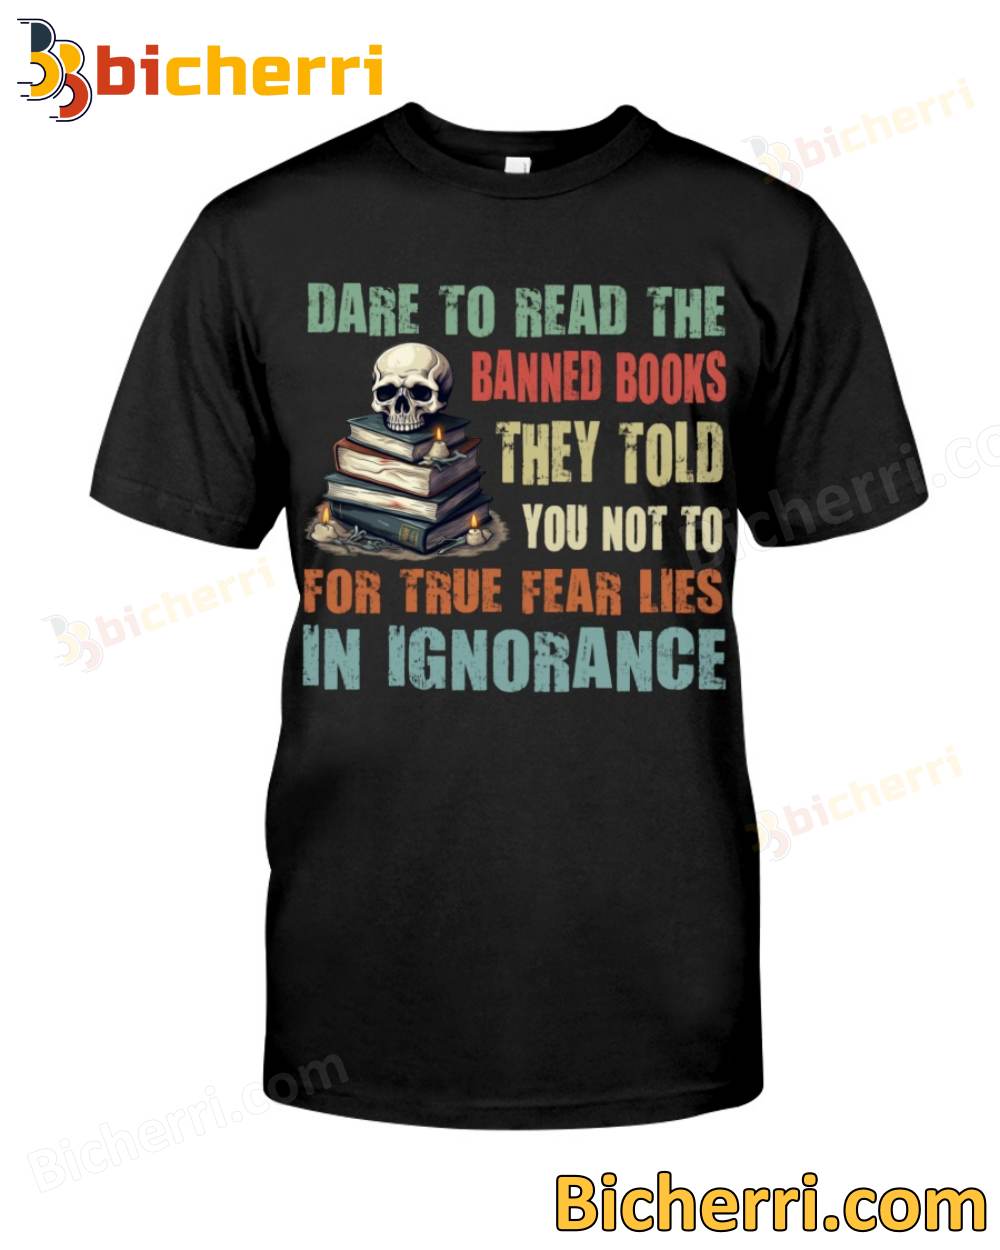 Dare To Read The Banned Books They Told You Not To For True Fear Lies In Ignorance T-shirt